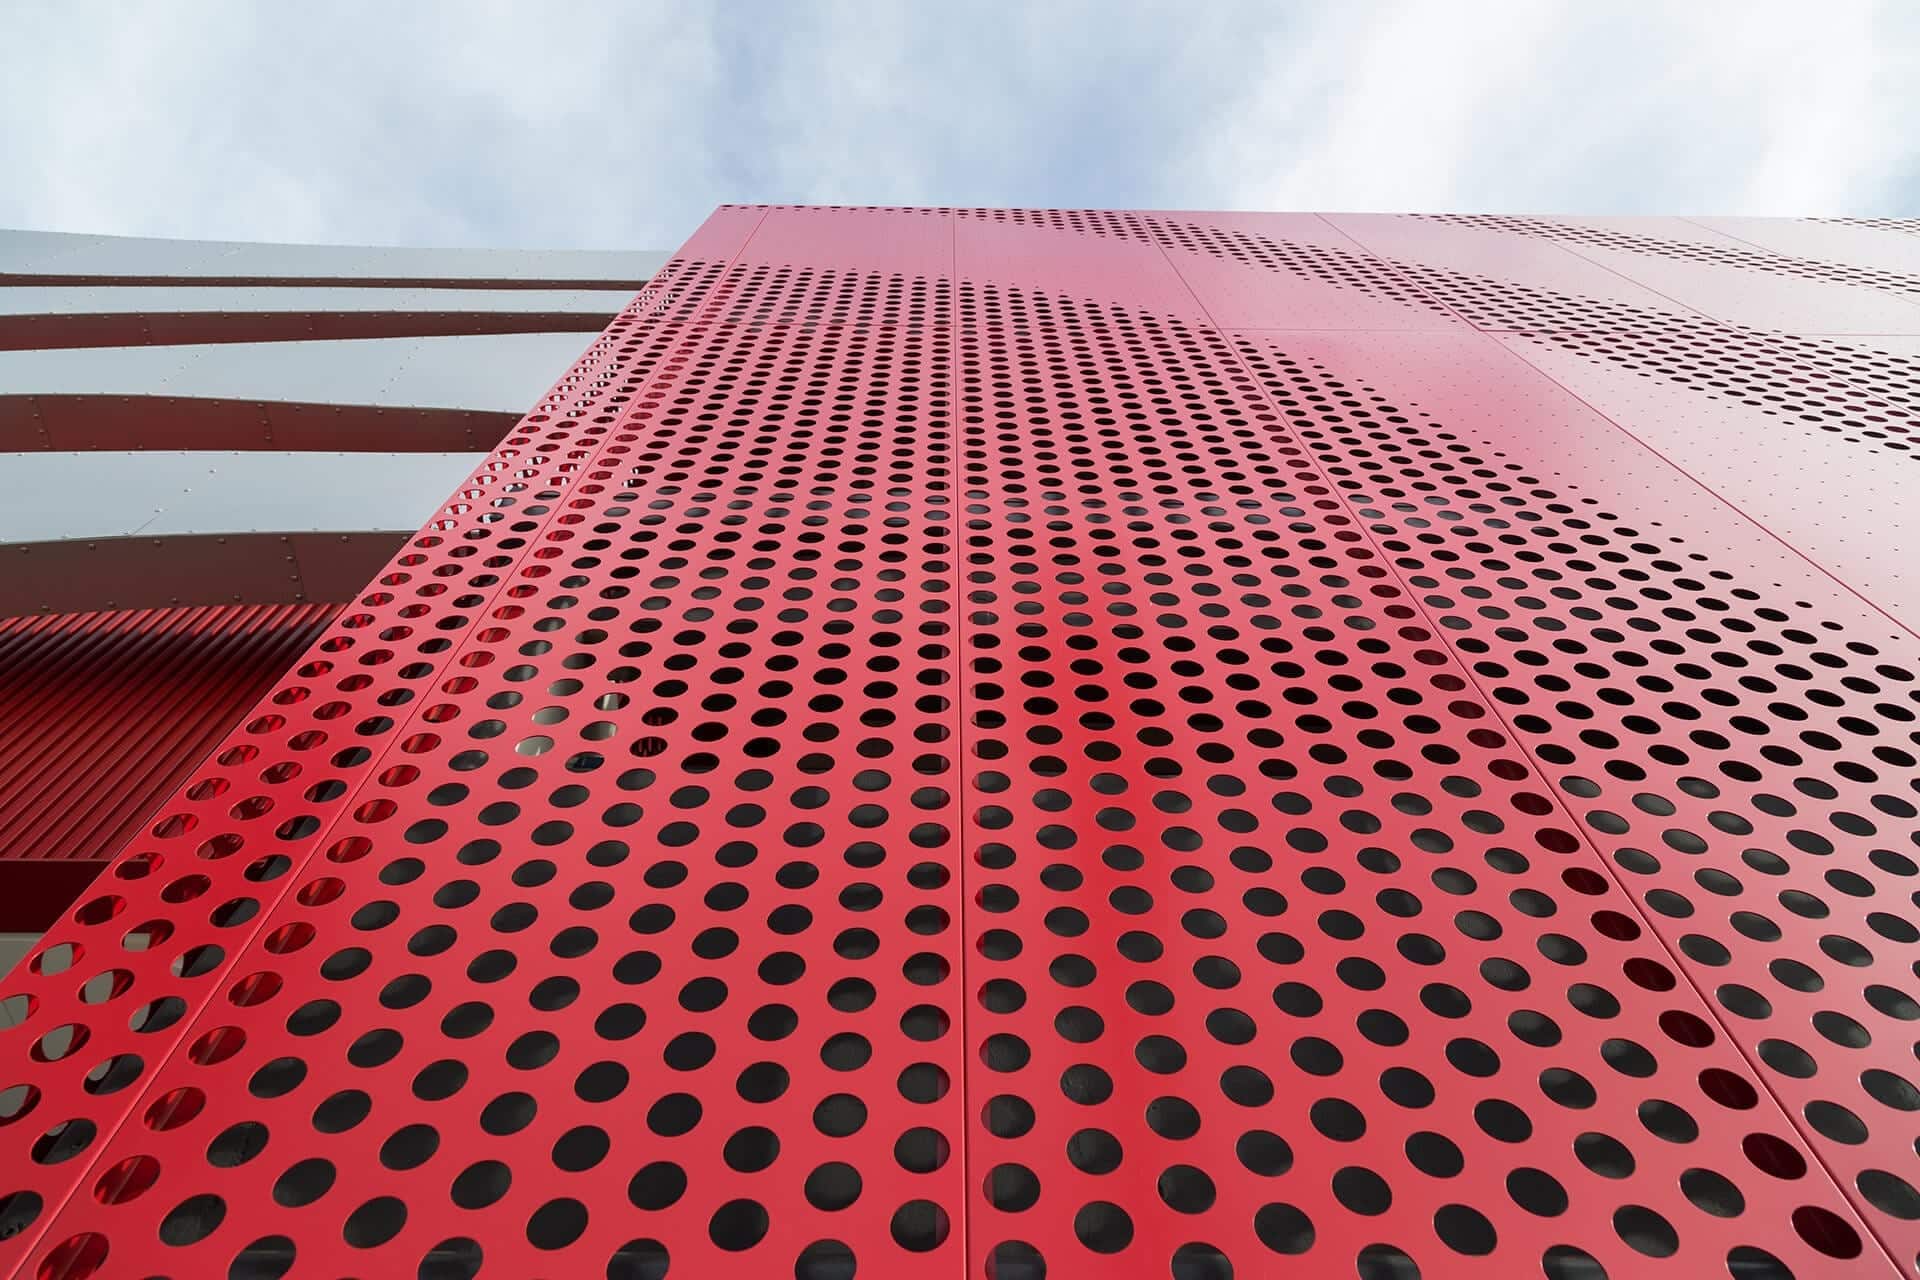 Detail of the screenwall facade of the Petersen Automotive Museum.